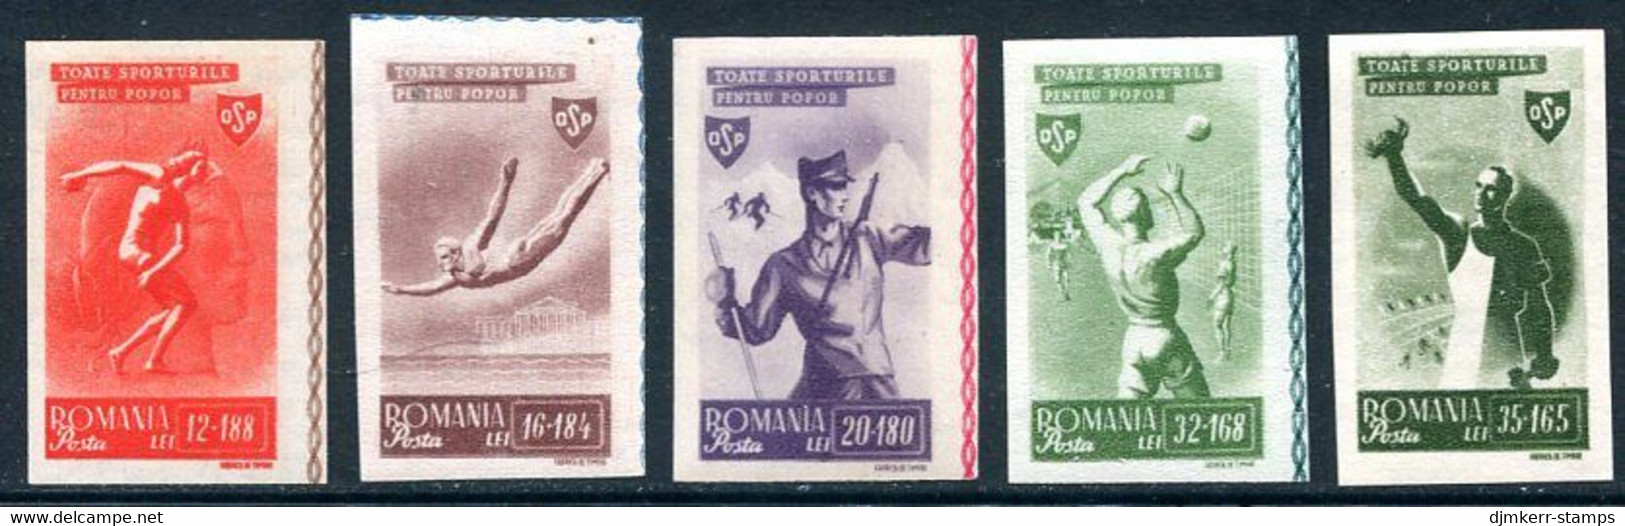 ROMANIA 1945 People's Sport Imperforate MNH / **. Michel 879-83 - Unused Stamps